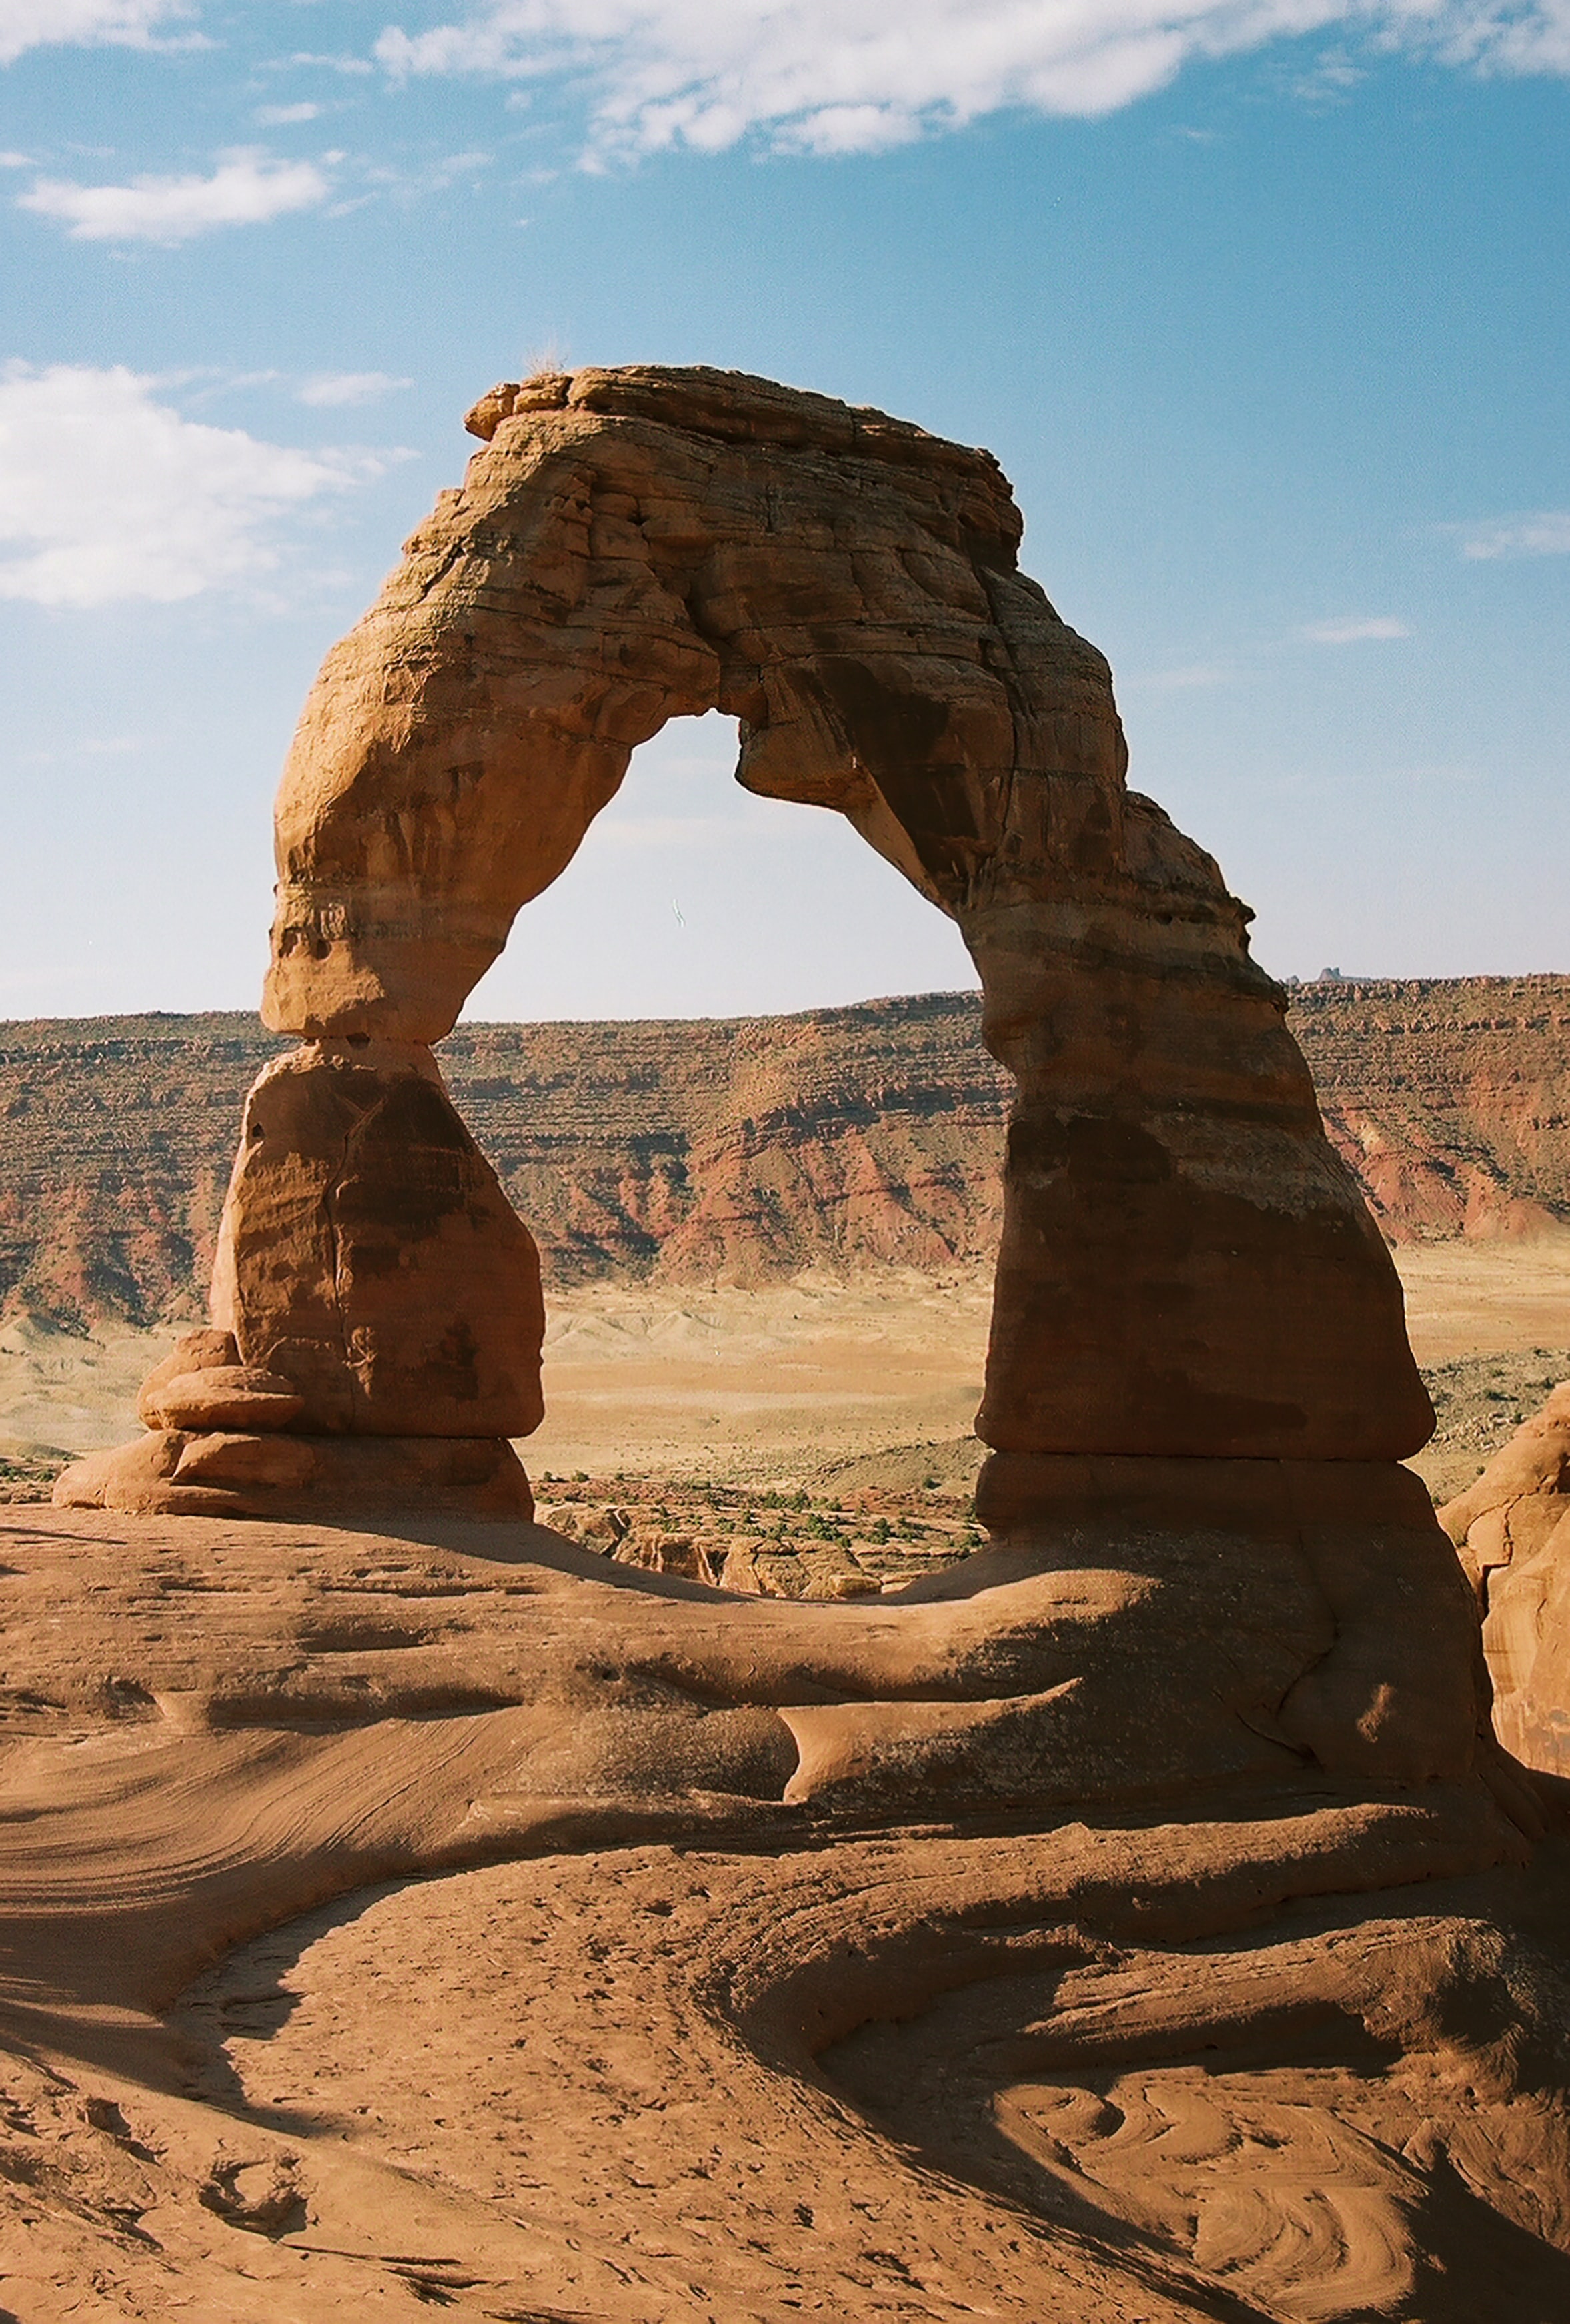 canyon, nature, sand, rocks, arch, sandy wallpaper for mobile